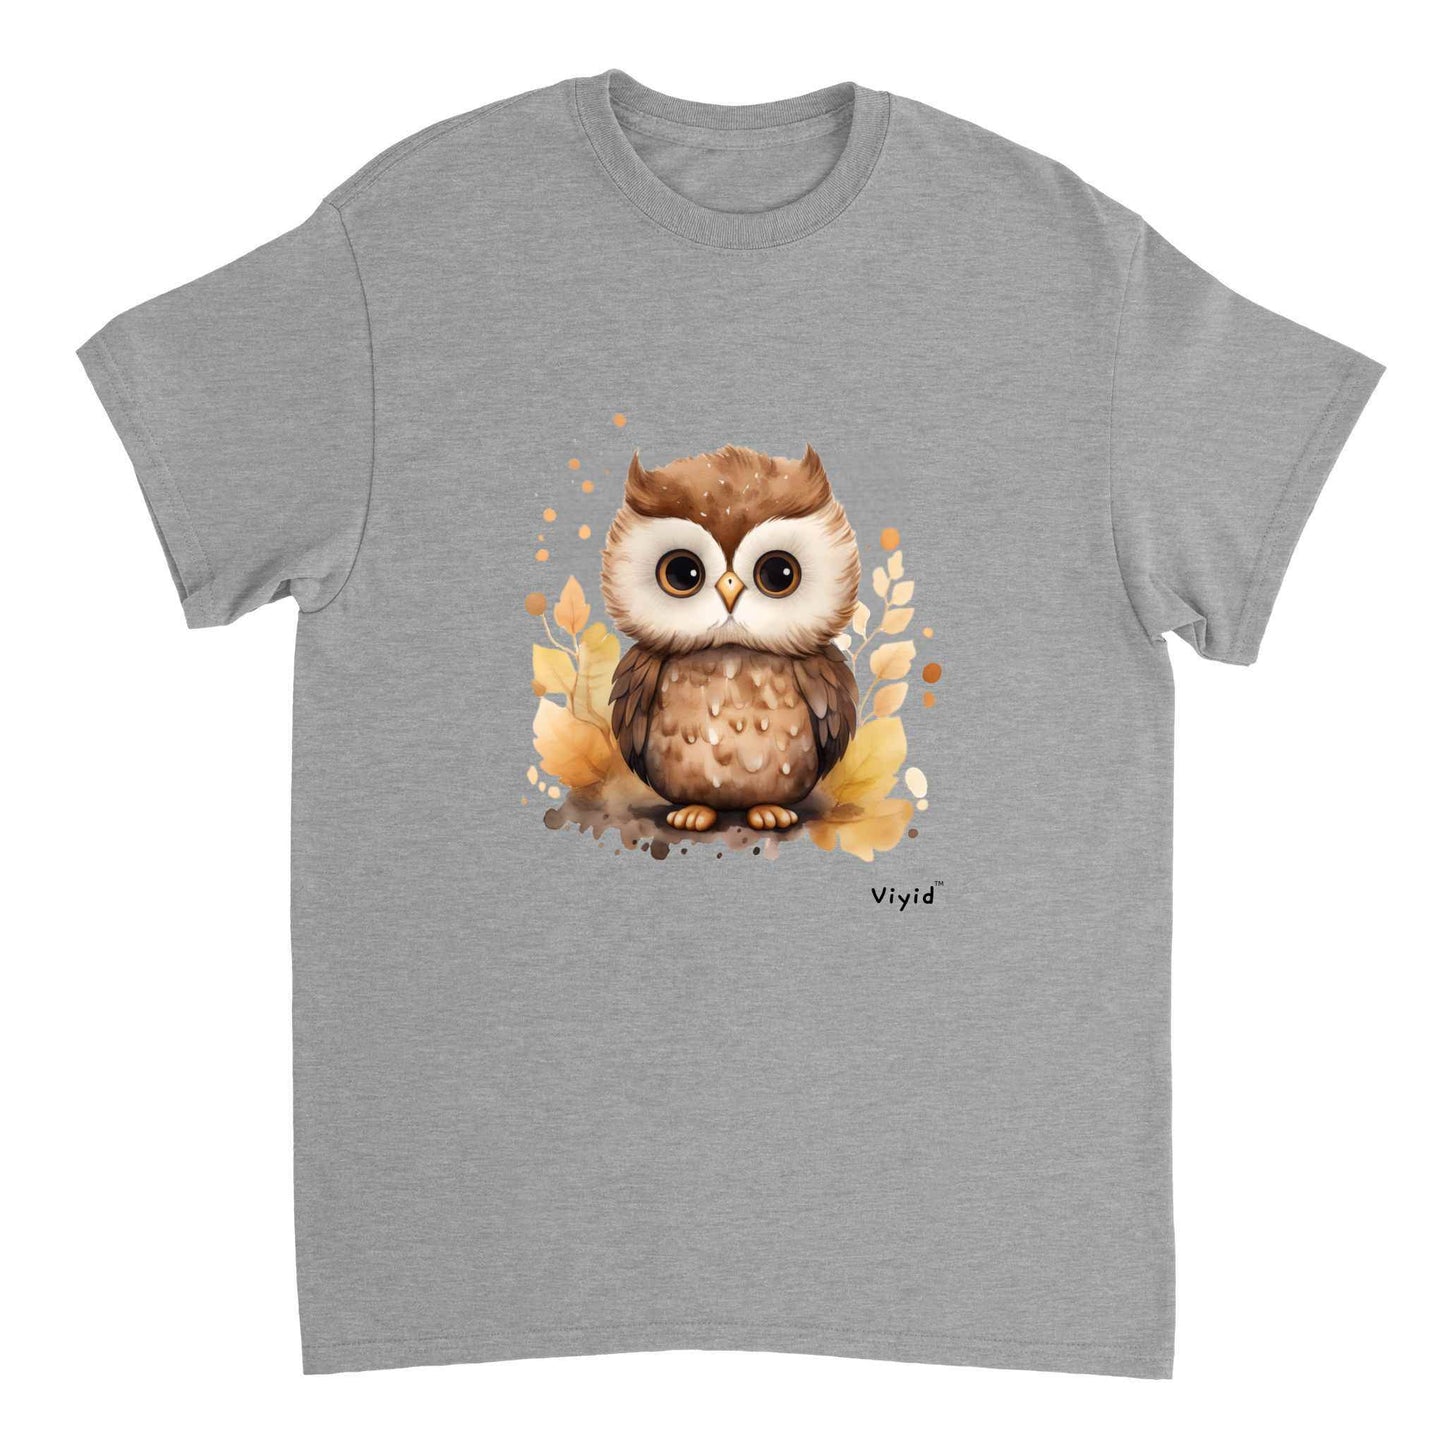 nocturnal owl adult t-shirt sports grey